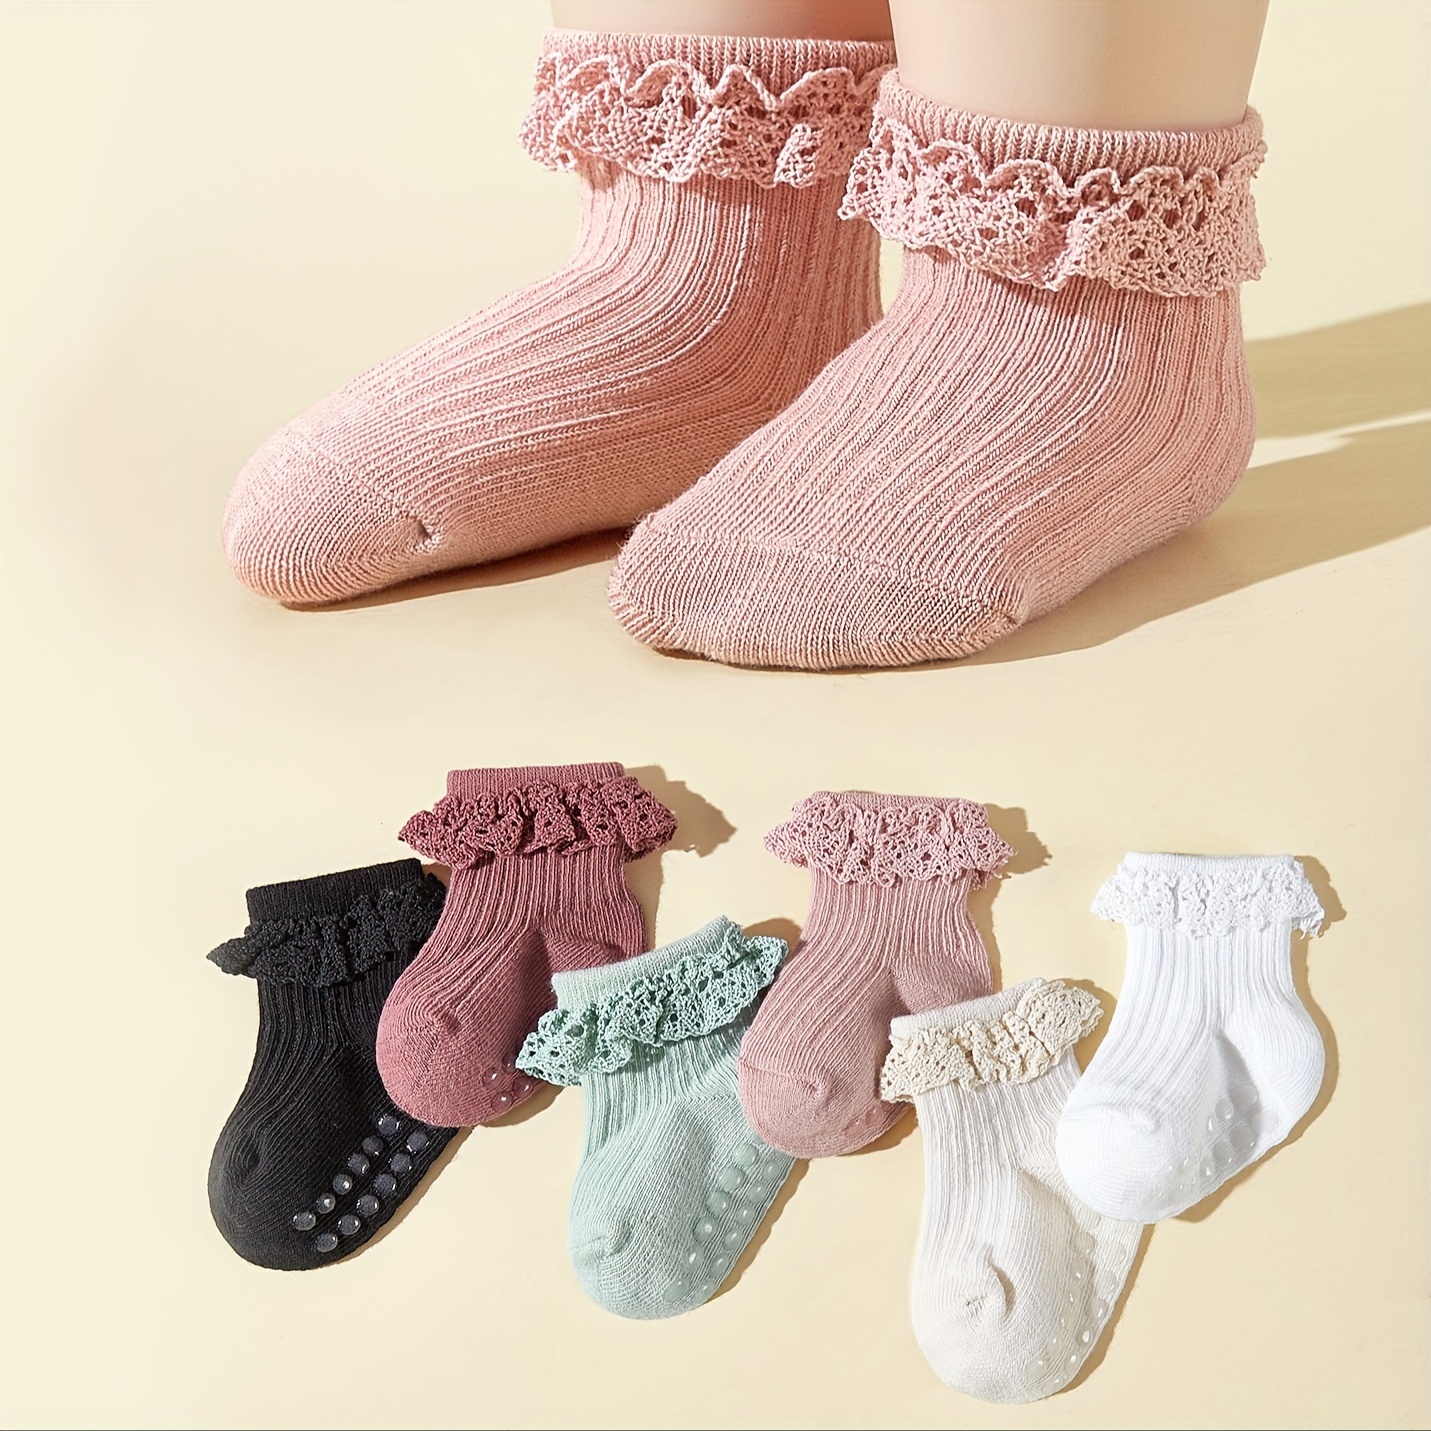 

6 Pairs Of Girl's Non-slip Socks, Lace Bottom Rubber Dot Cotton Blend Comfy Breathable Soft Socks For Toddler Wearing